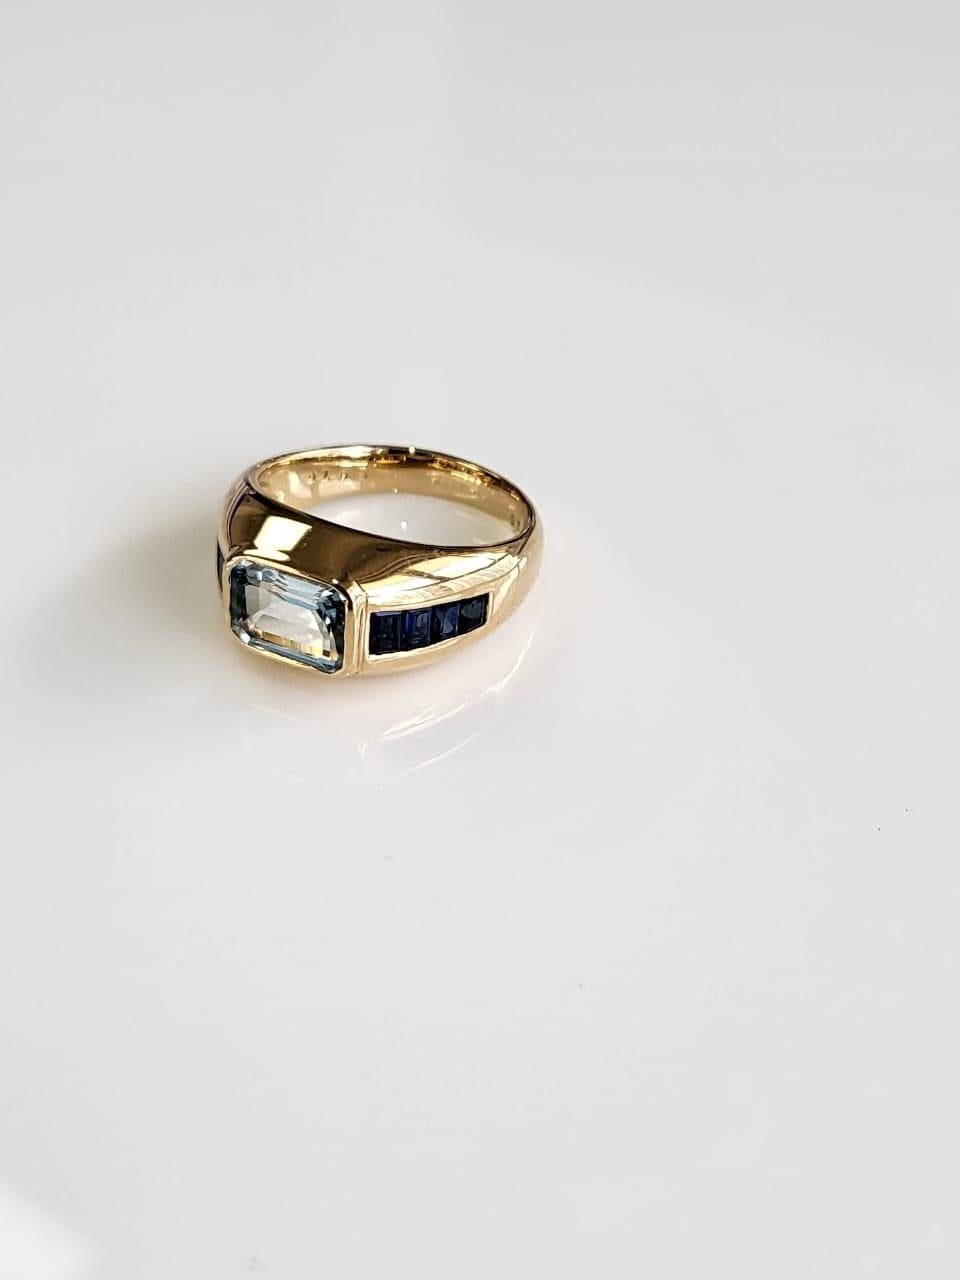 Emerald Cut Set in 18K Yellow Gold, 1.26 carats Aquamarine & Blue Sapphire Engagement Ring For Sale